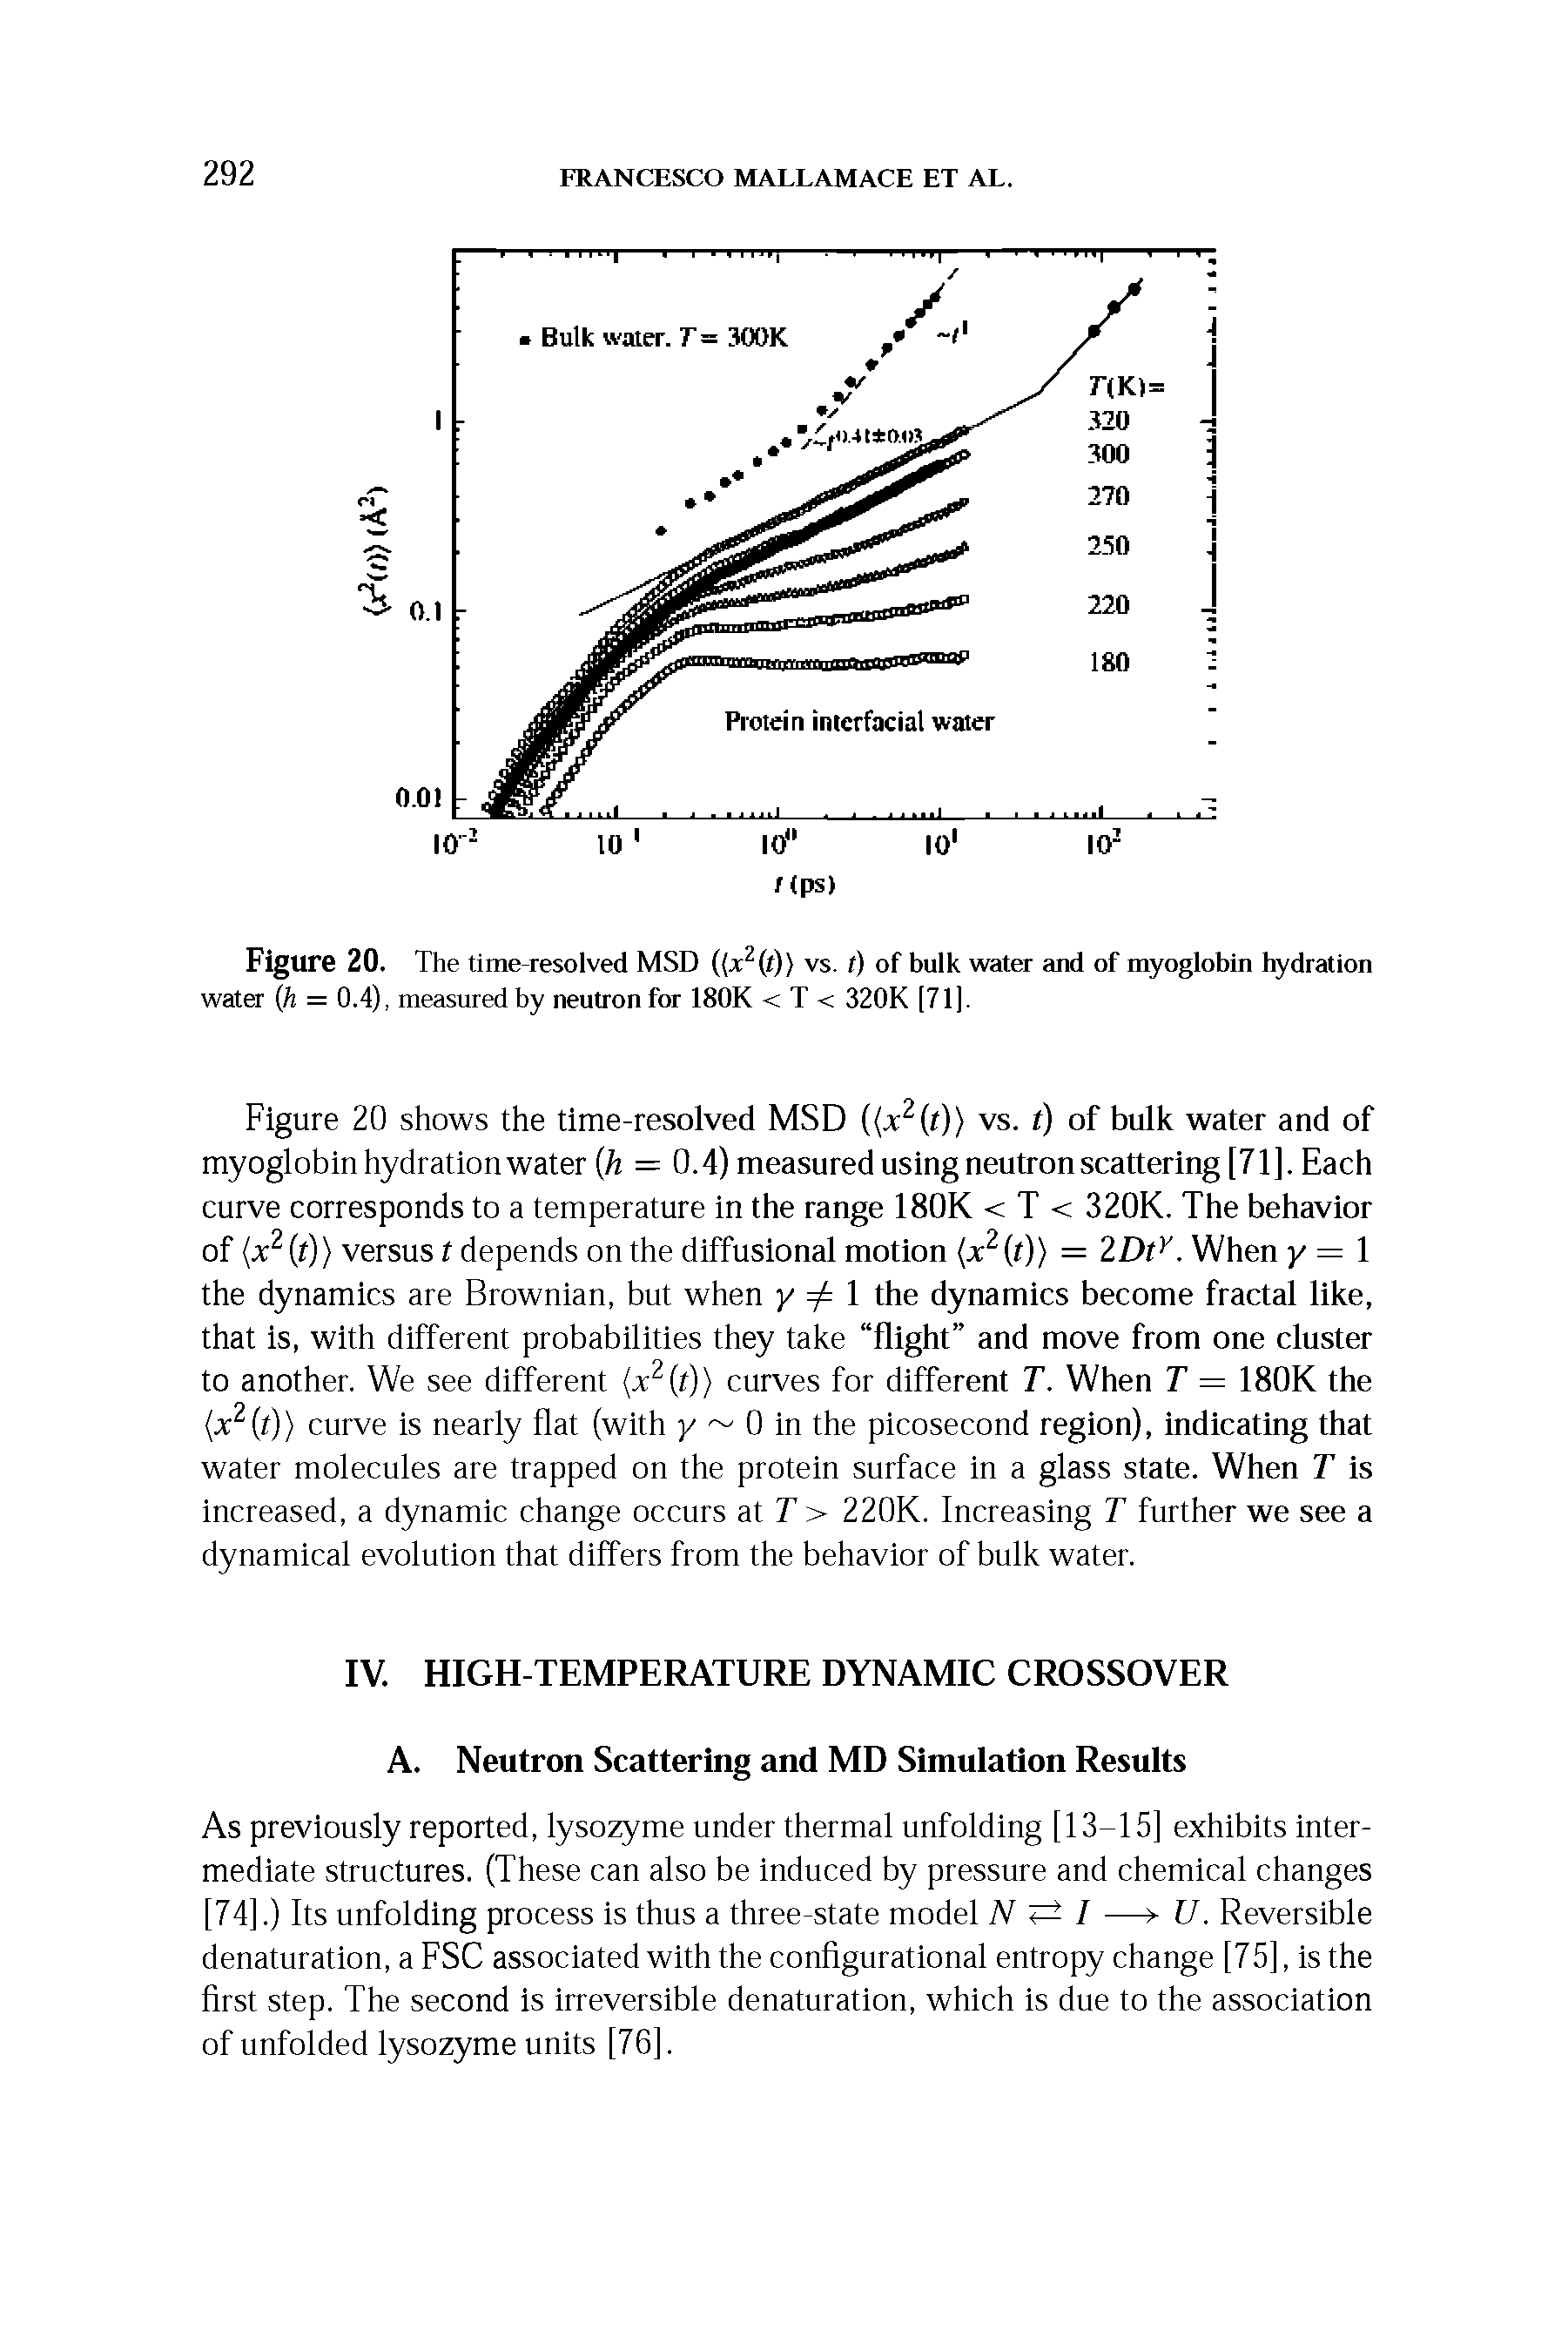 Figure 20. The time-resolved MSD ( x (t)) vs. t) of bulk water and of myoglobin hydration water h = 0.4), measured by neutron for 180K < T < 320K [71].